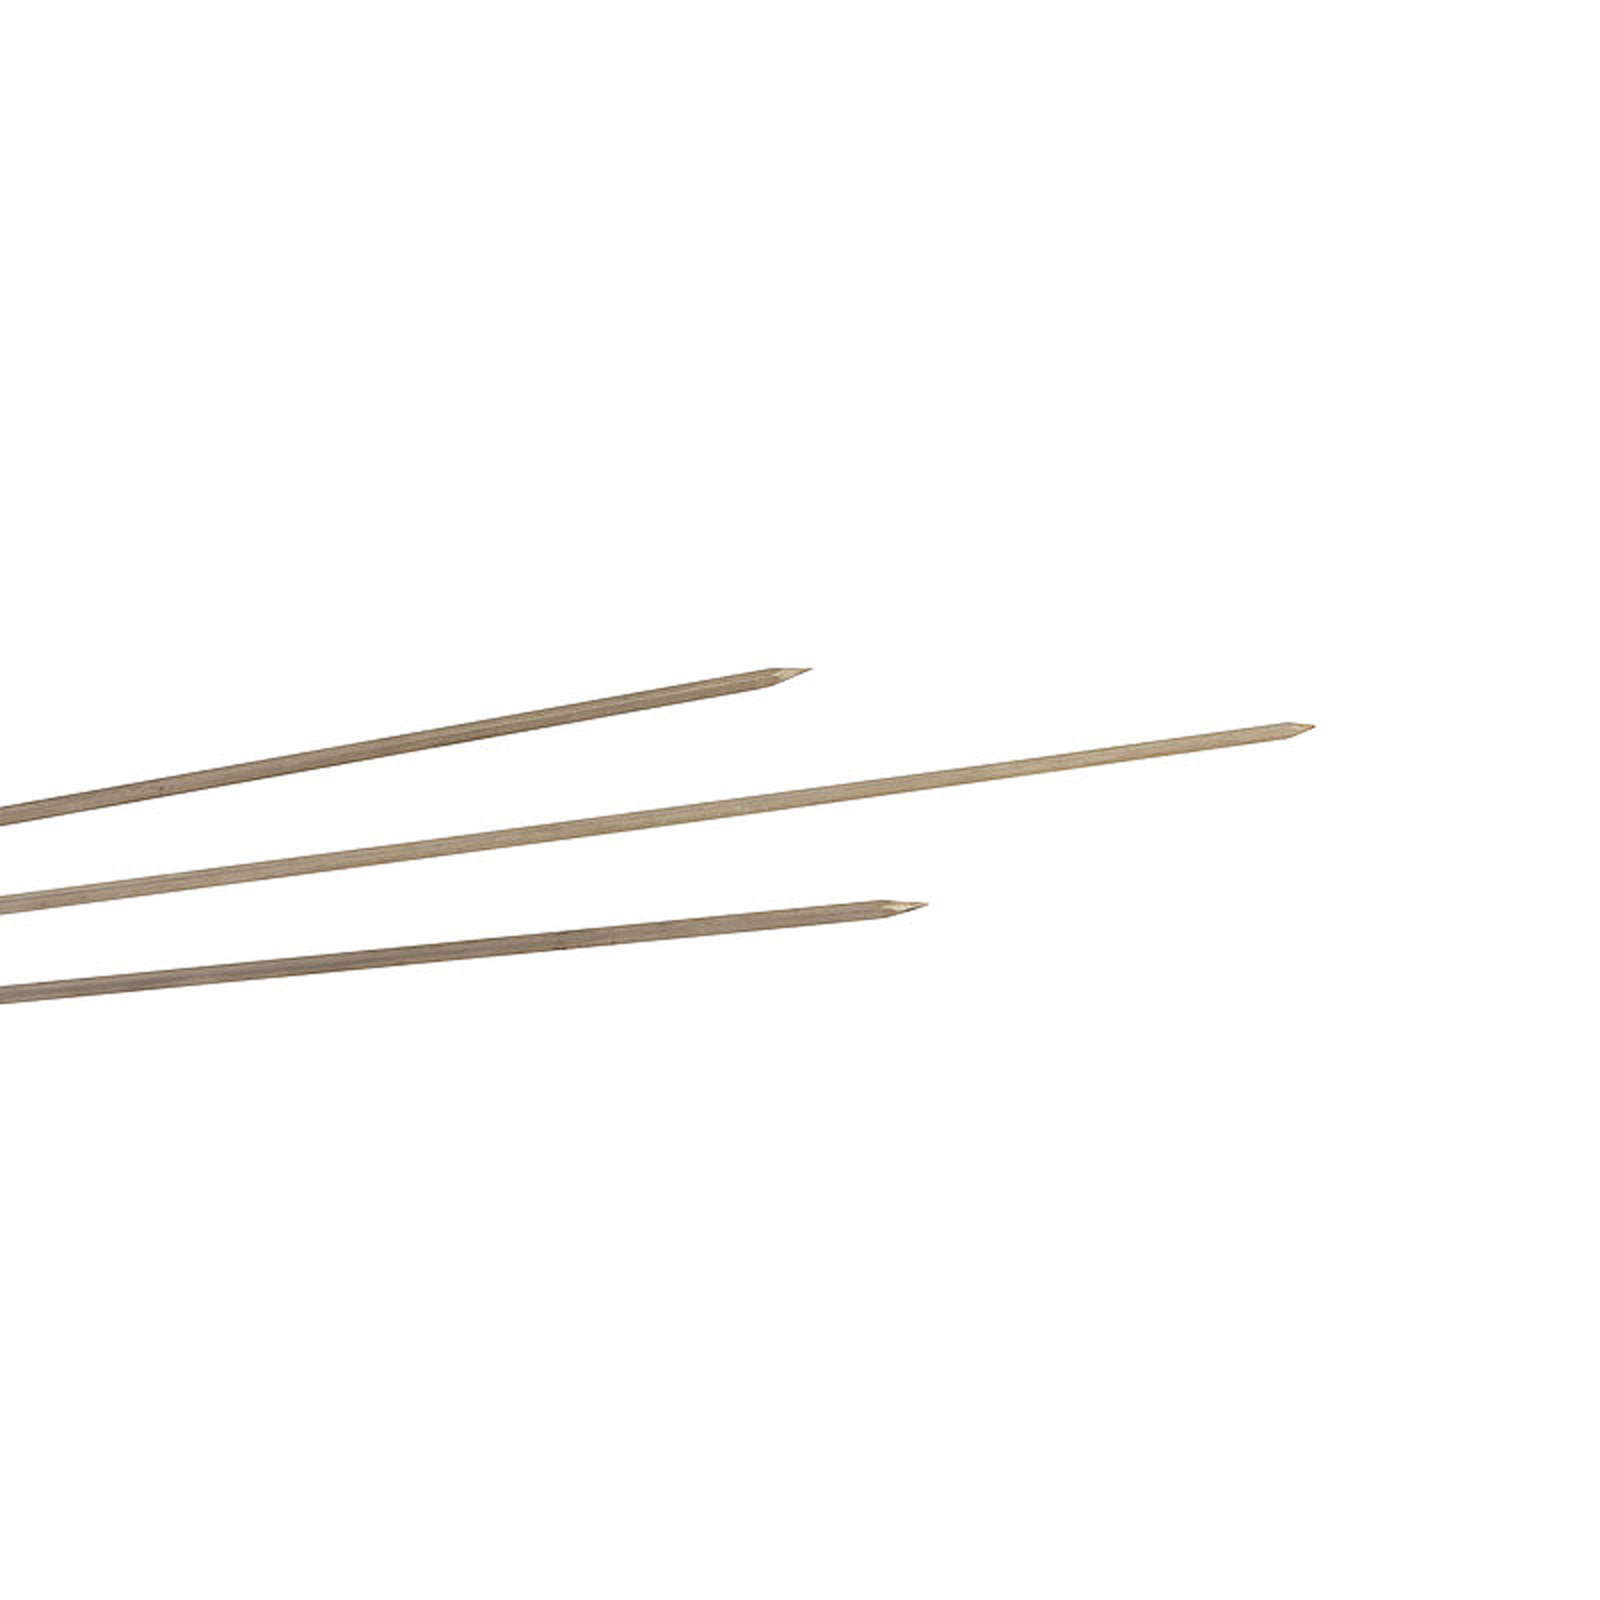 Cyprus Grill 3 Prong Stainless Steel Skewer (each) for the Modern Cyprus Grill Rotisserie - PSS-1010